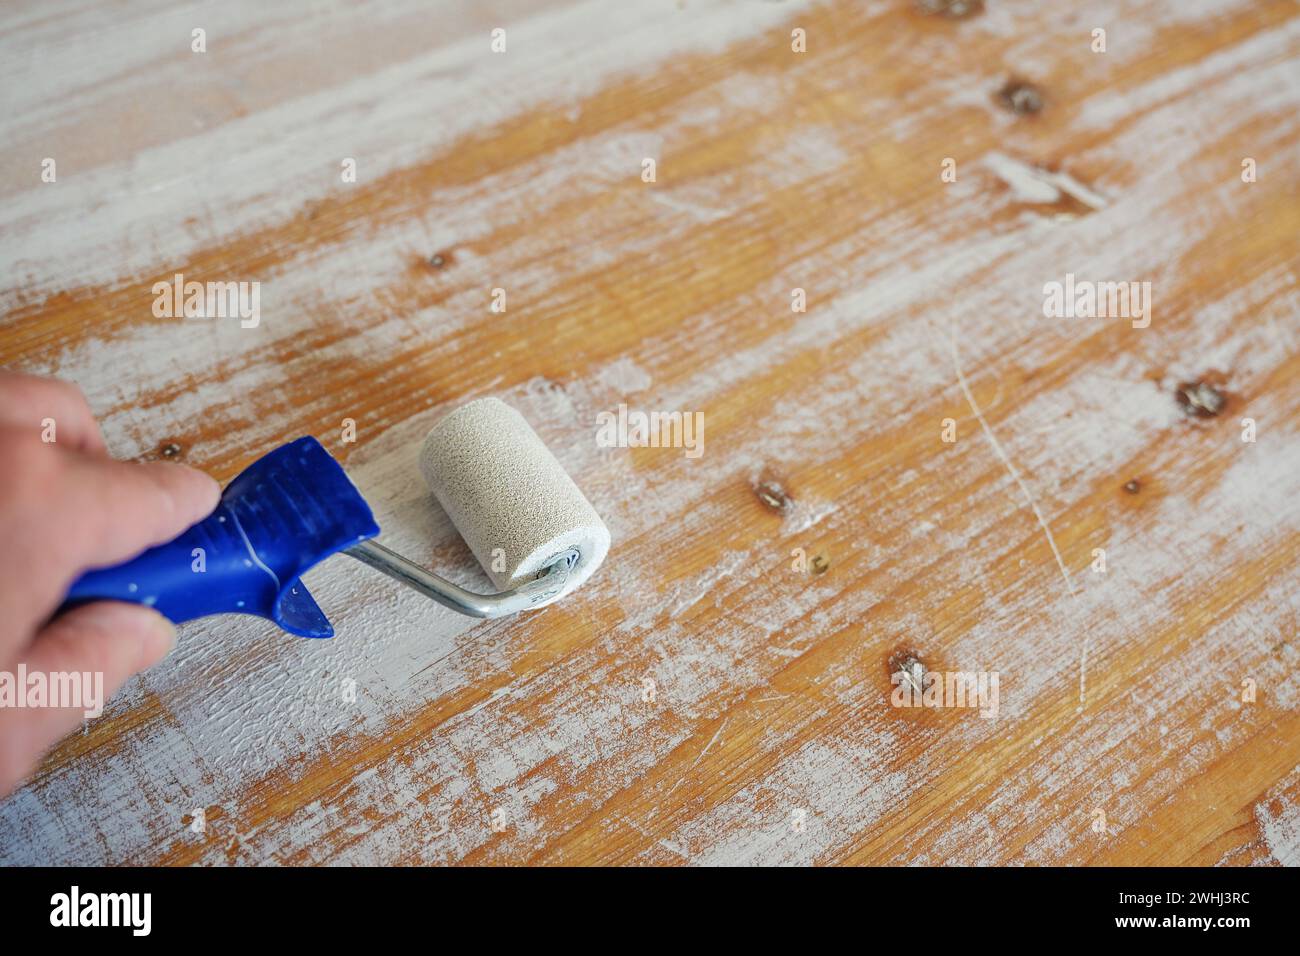 Hand with paint roller renews the glaze on the surface of an old wooden table, do it yourself furniture renovation or craft conc Stock Photo